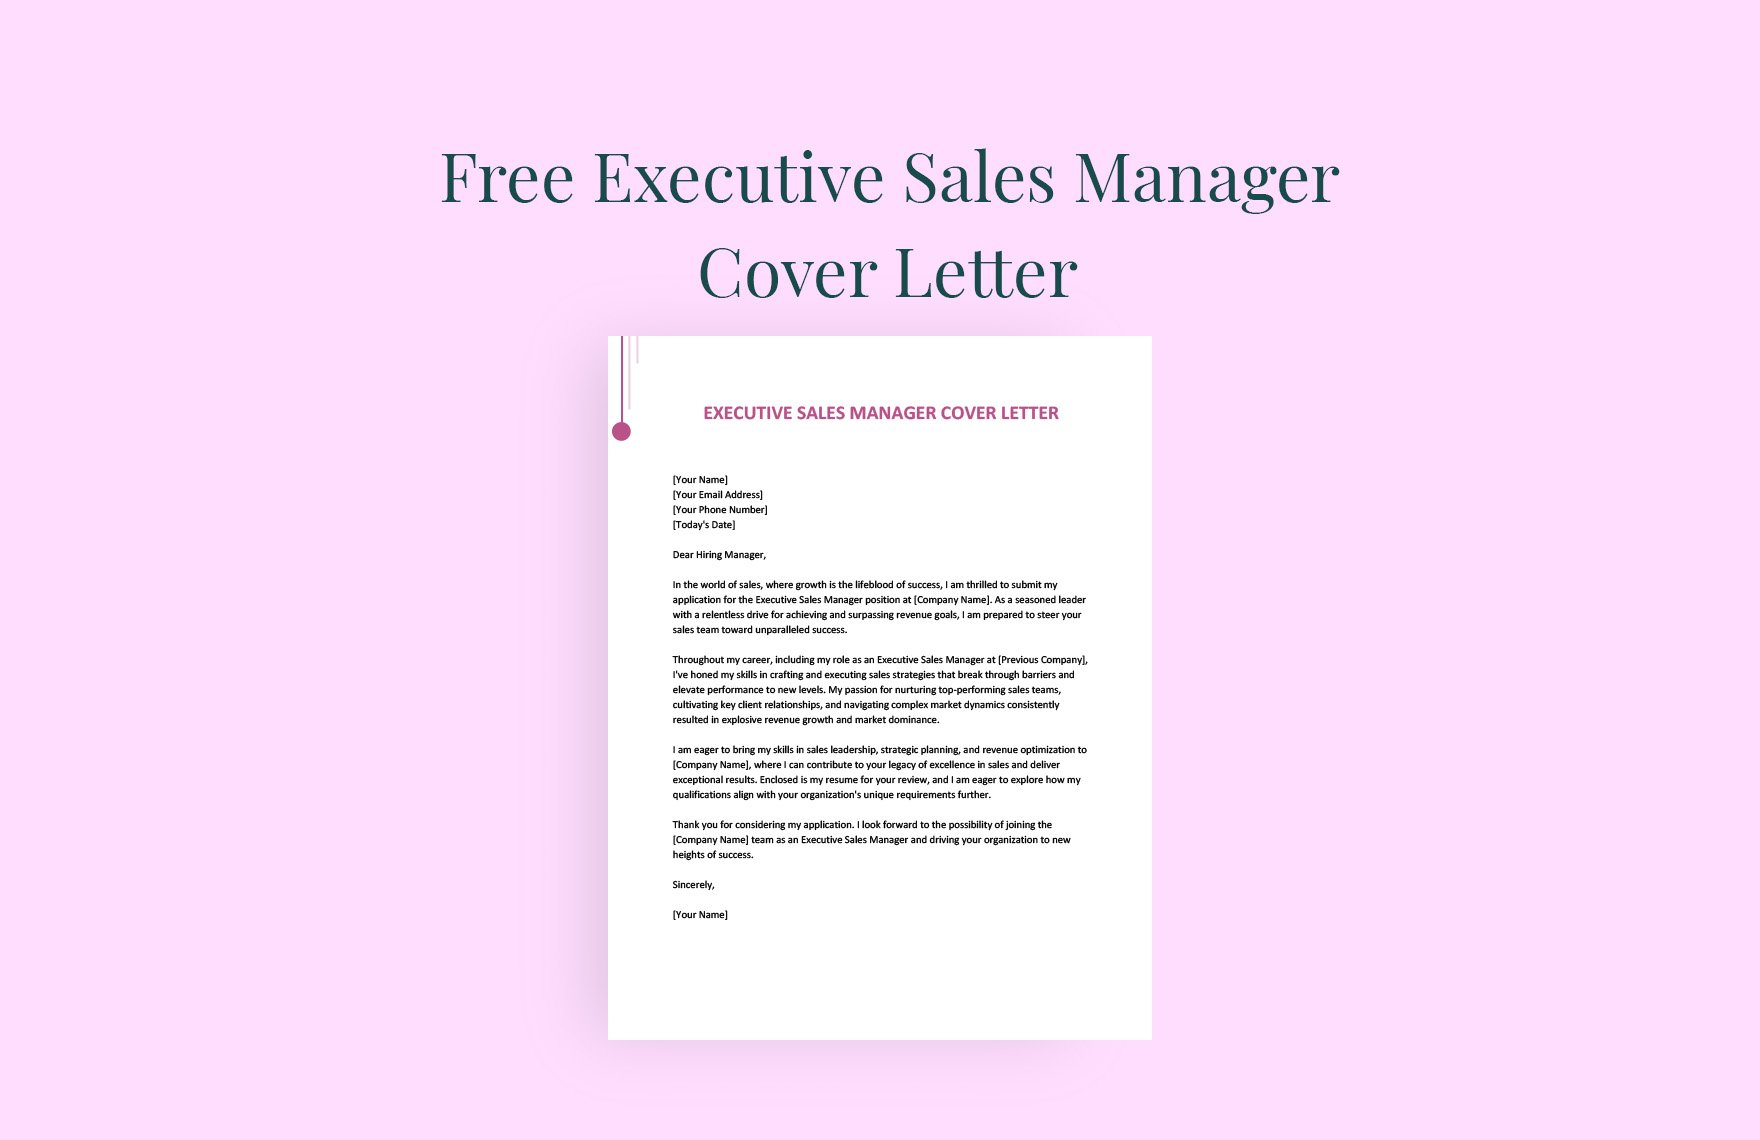 Executive Sales Manager Cover Letter